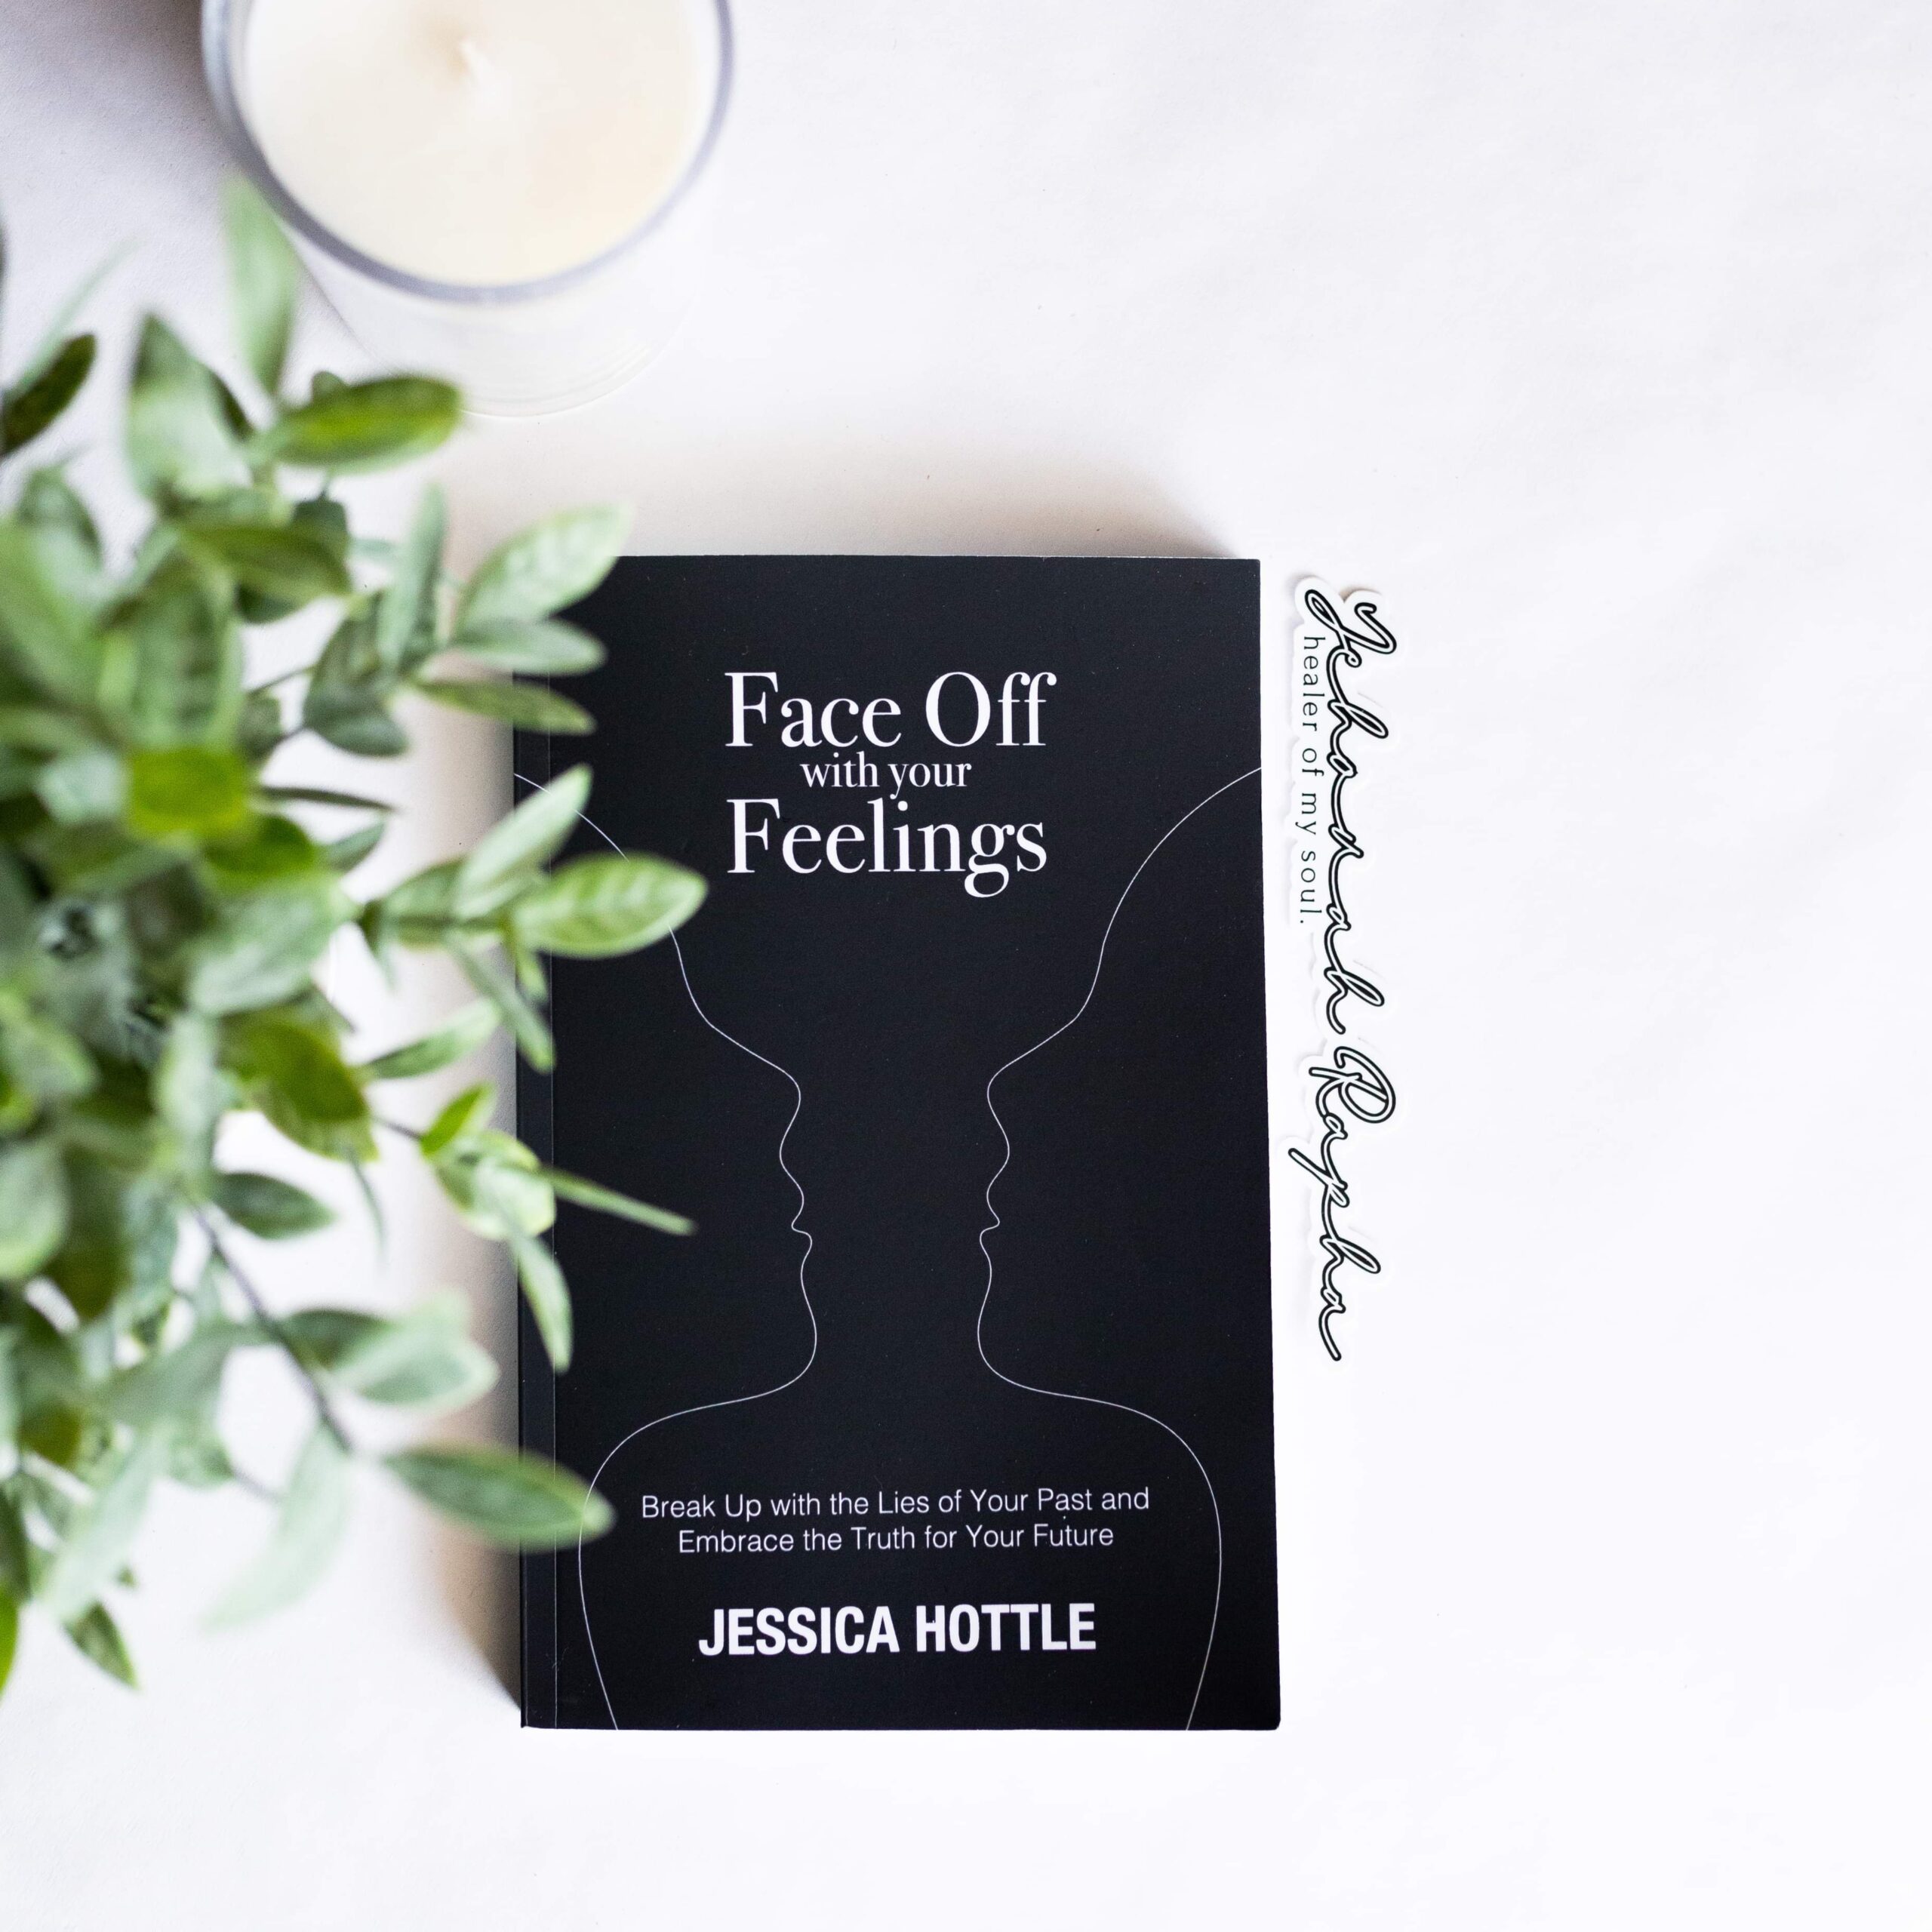 face off with your feelings book by Jessica Hottle